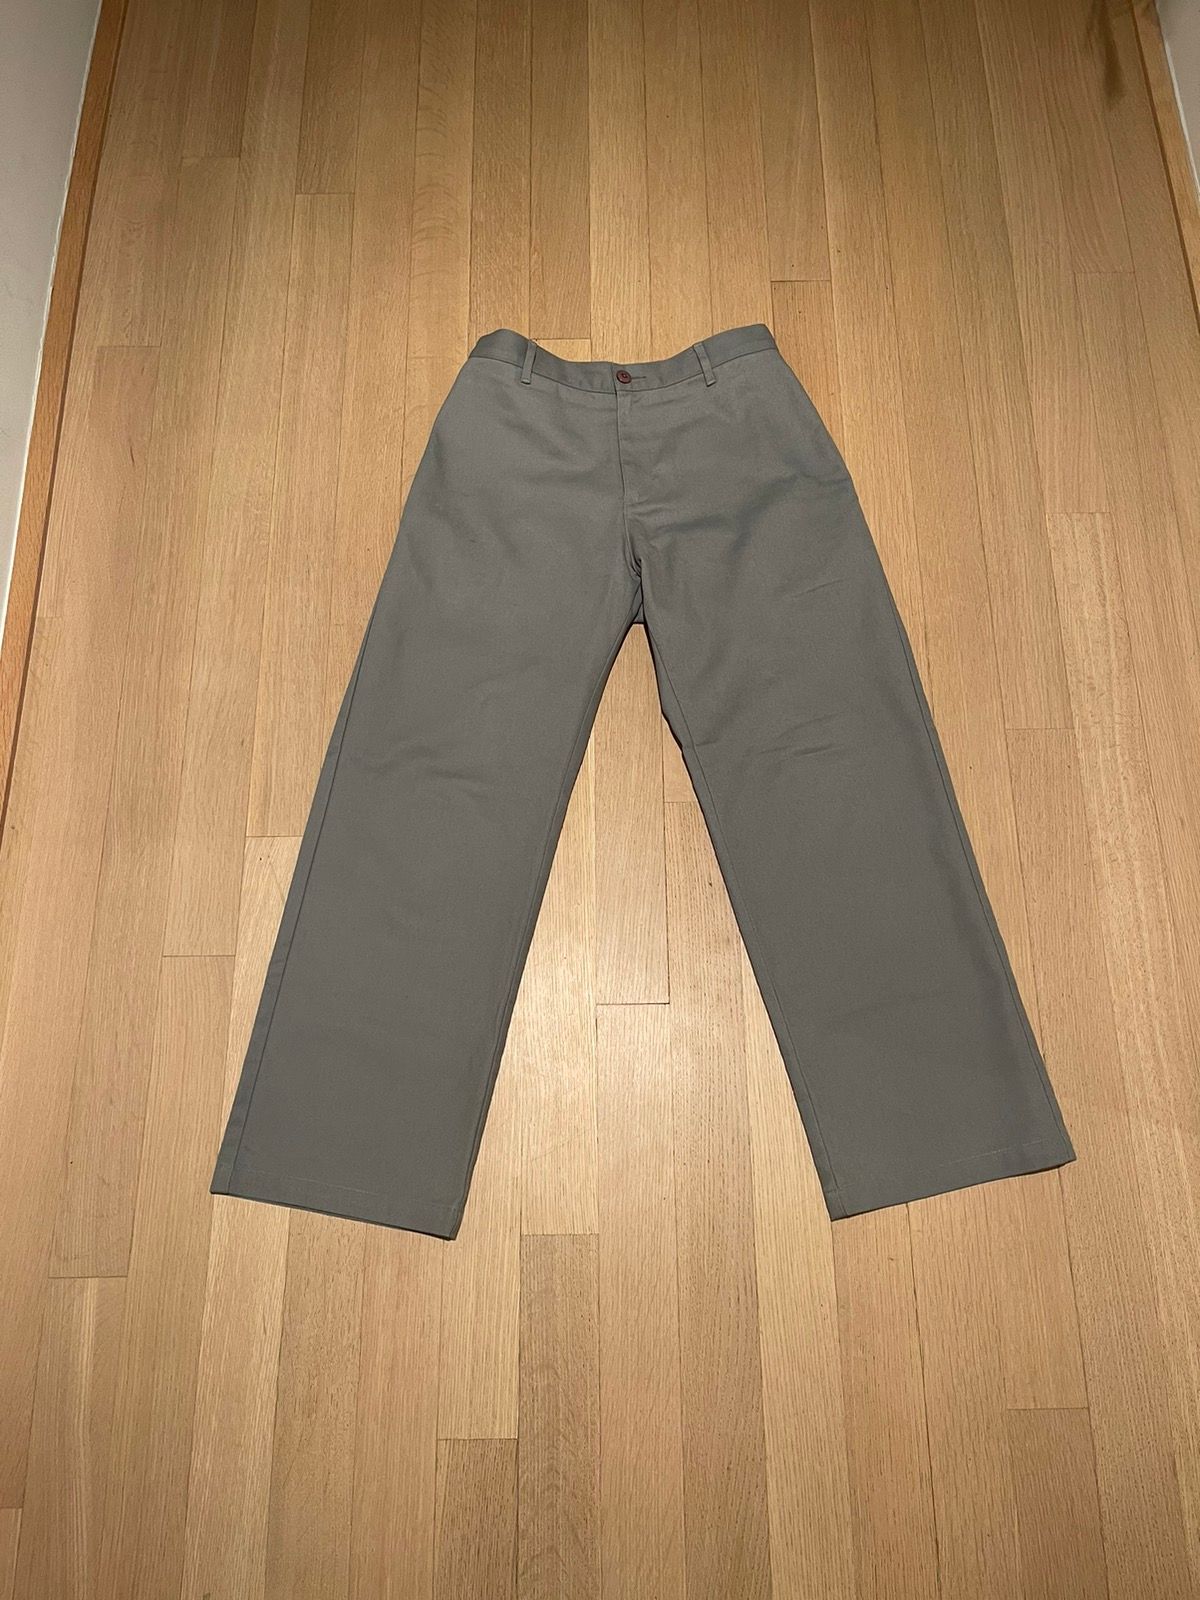 Noon Goons NOON GOONS CLUB STRAIGHT-LEG TROUSER Size US 30 / EU 46 - 1 Preview